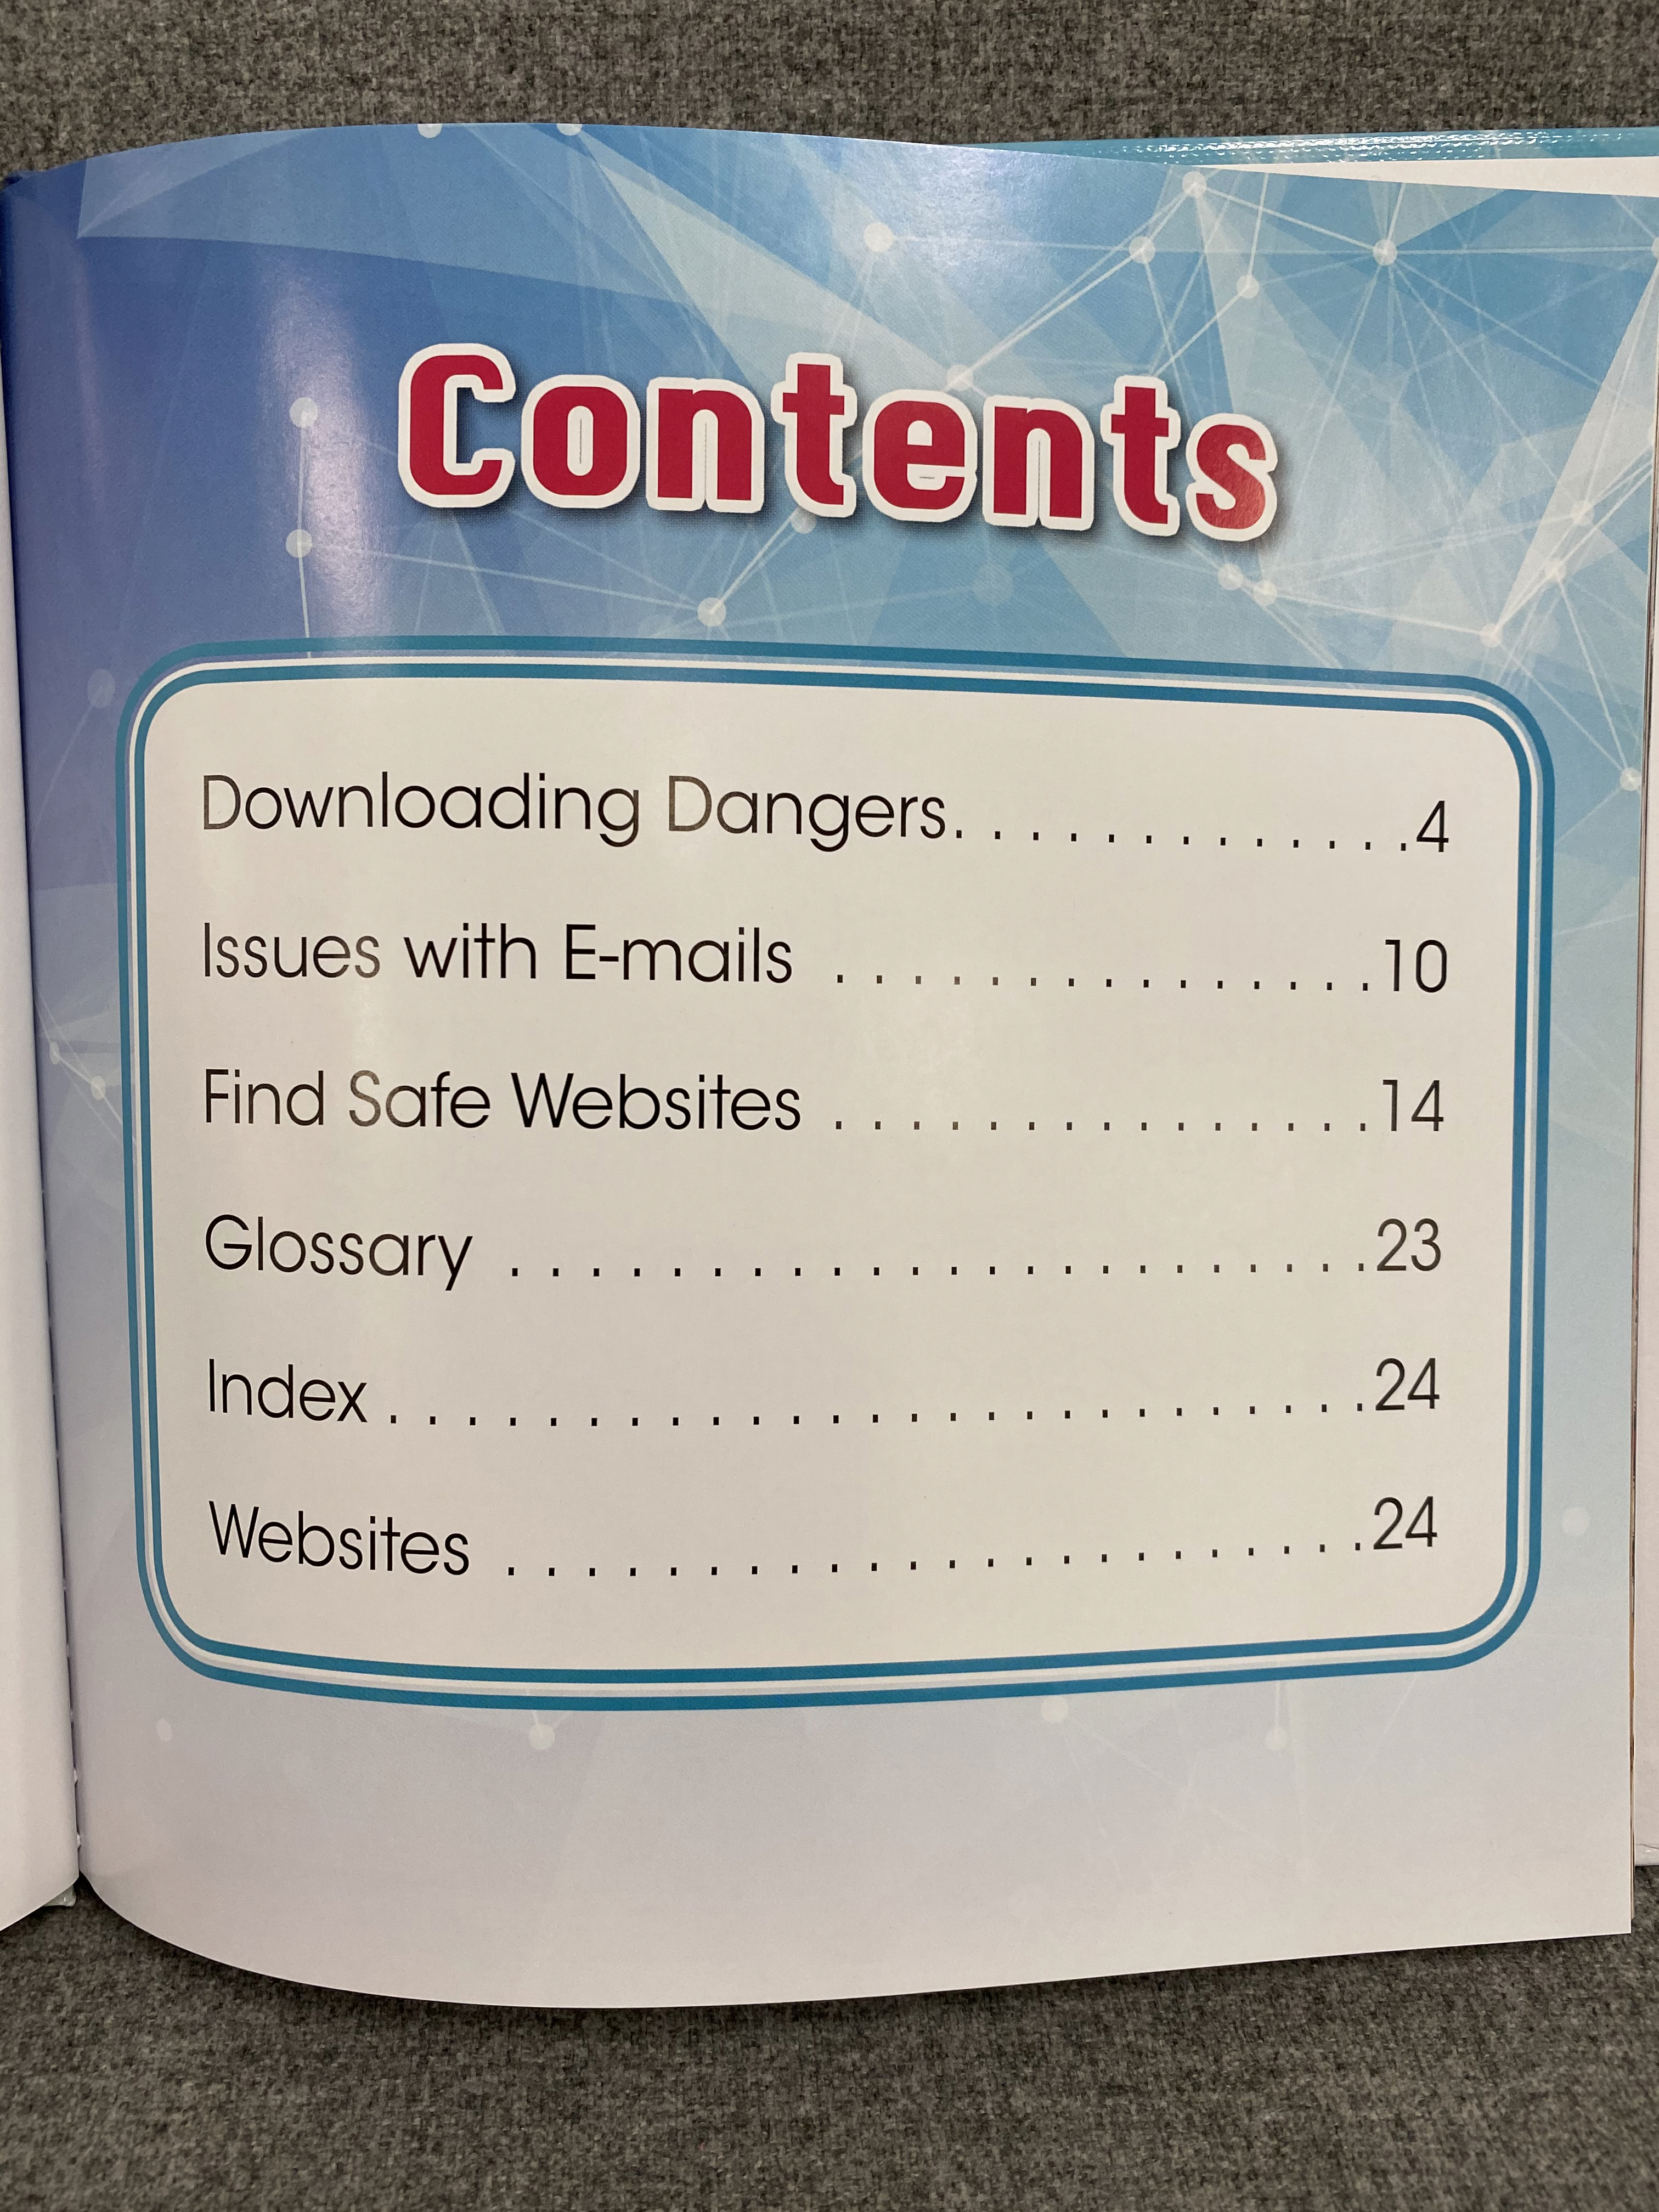 The table of contents for Avoiding Dangerous Downloads